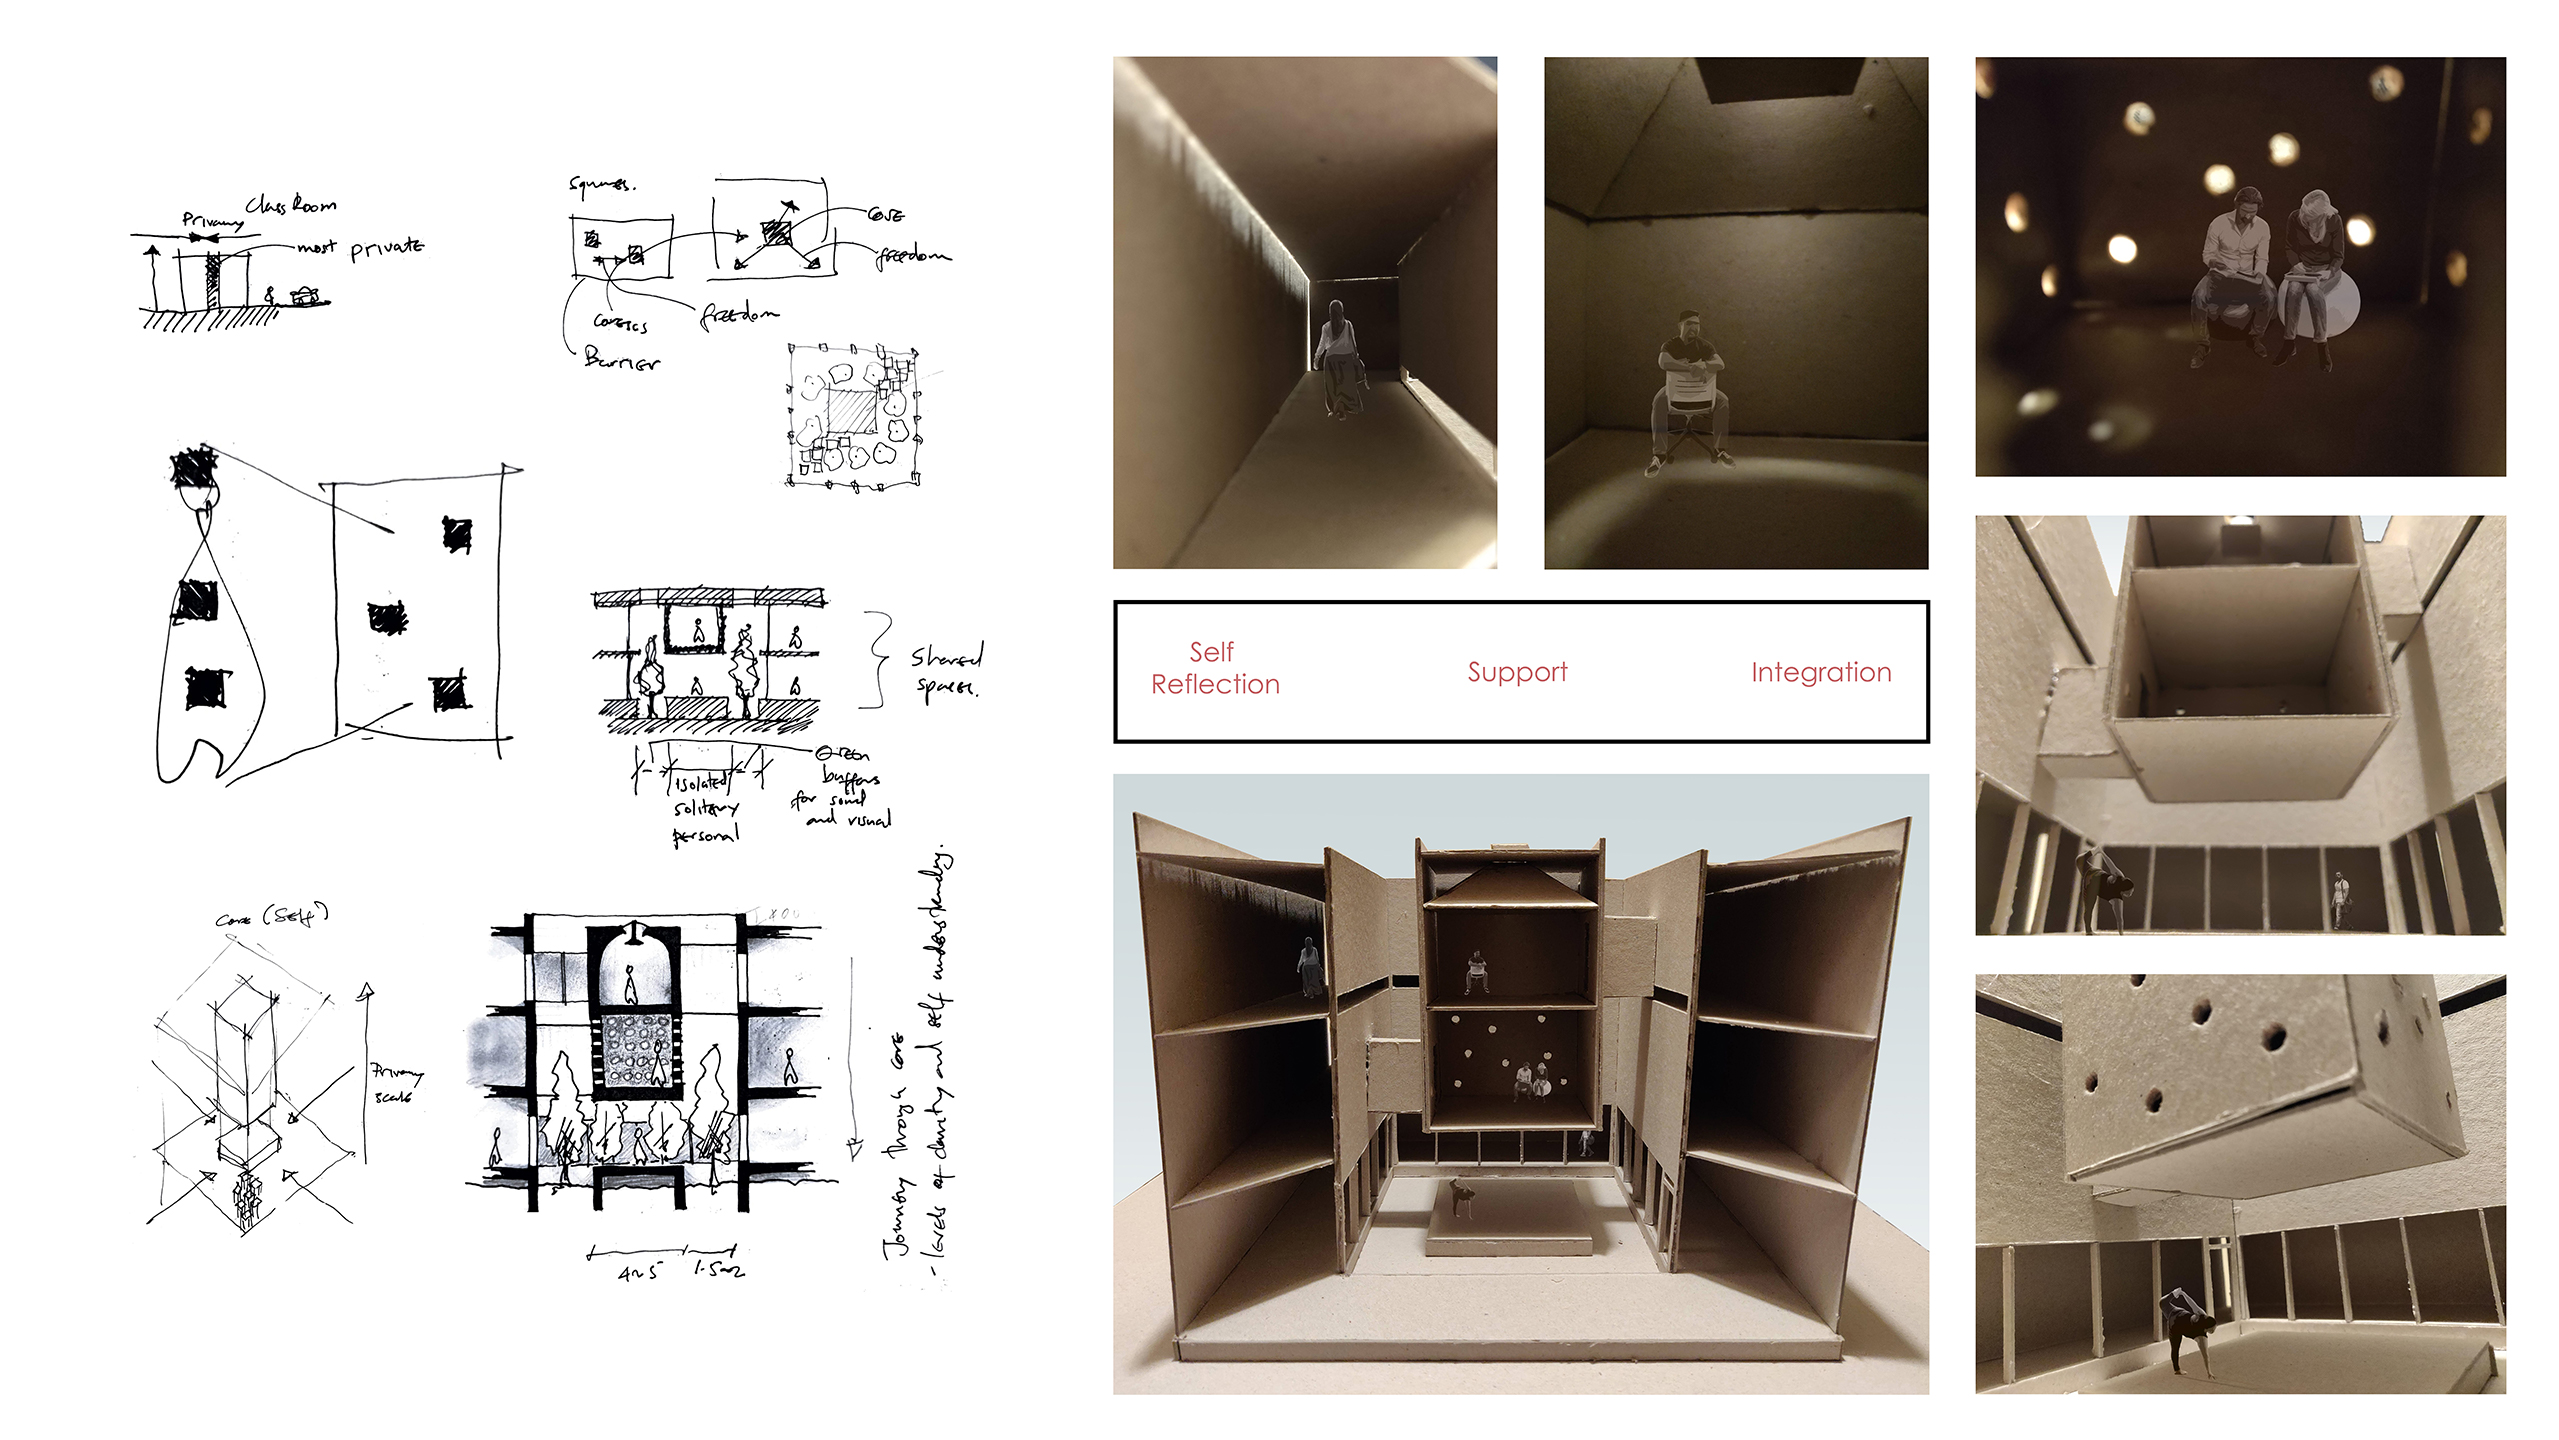 Concept develops from the translation of human cores as a building typology. Images of template model